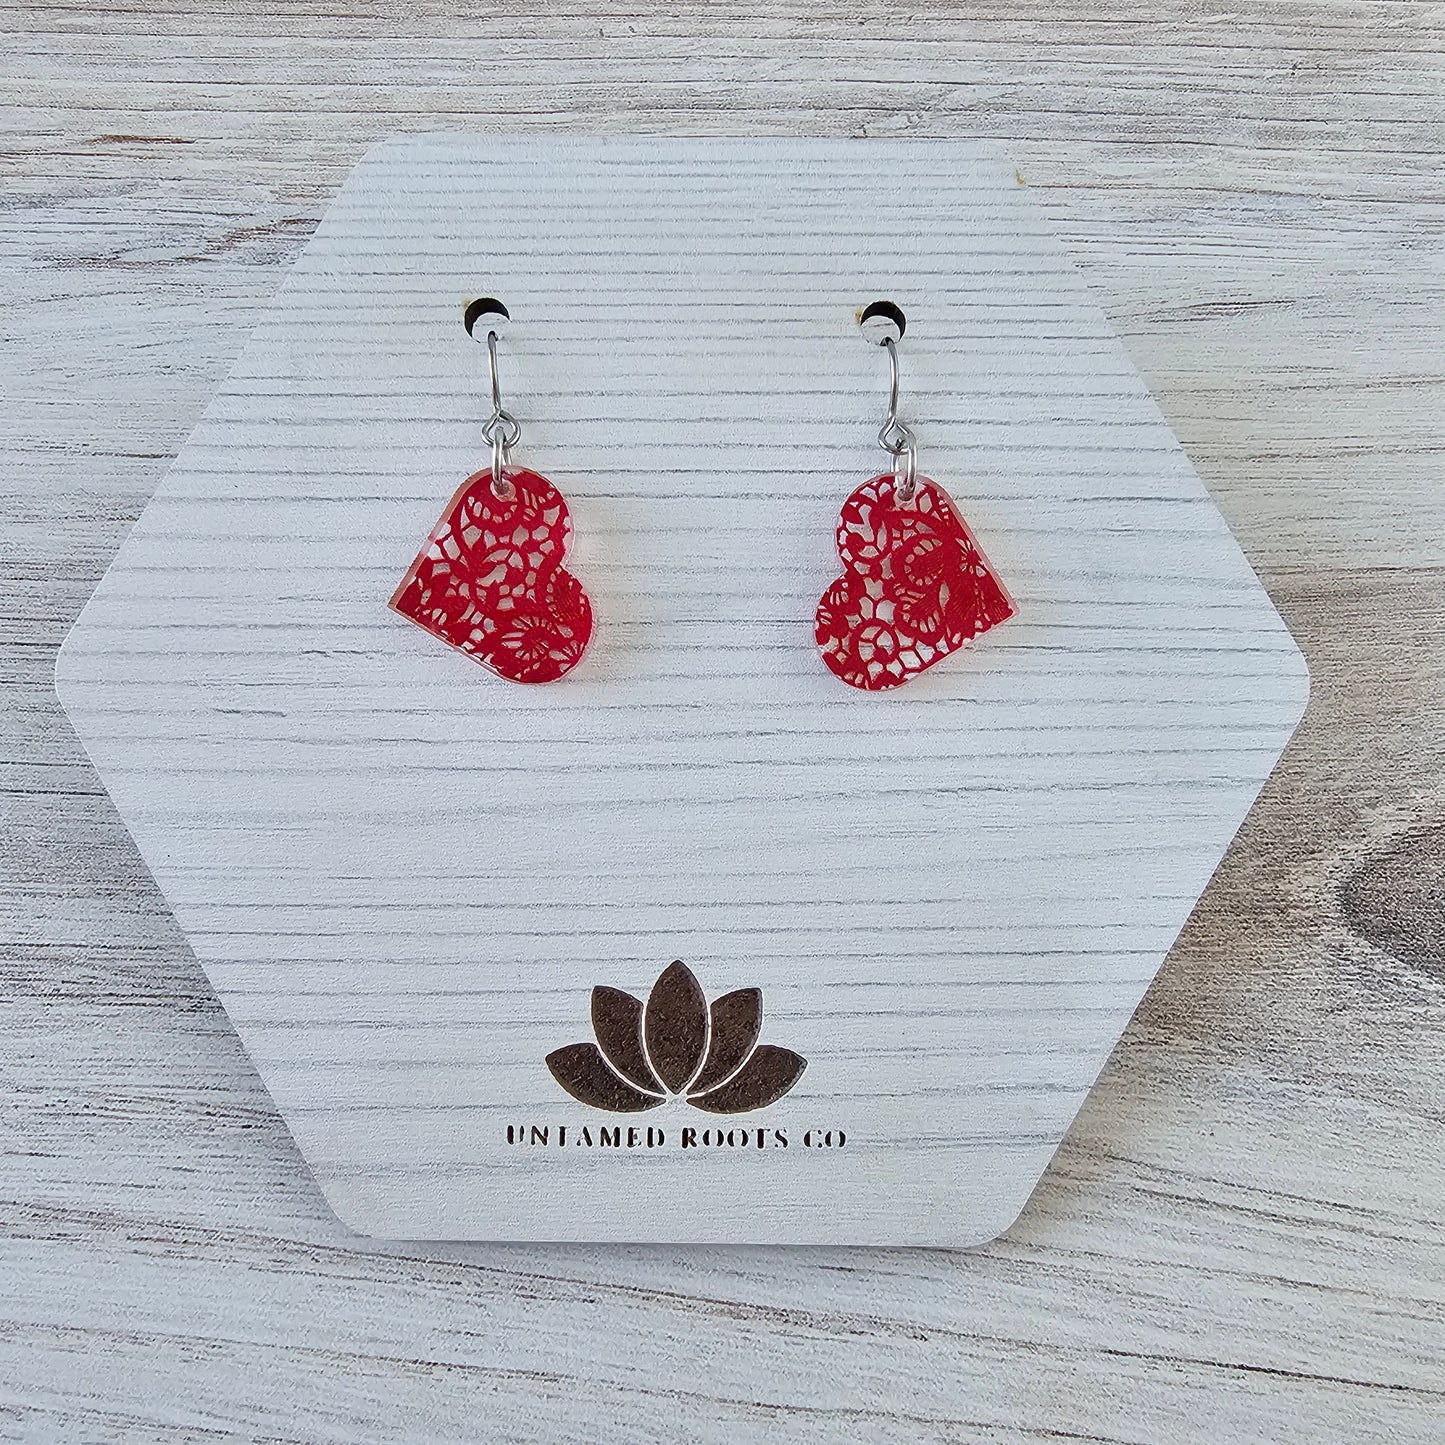 Small Red Lace Heart Earrings